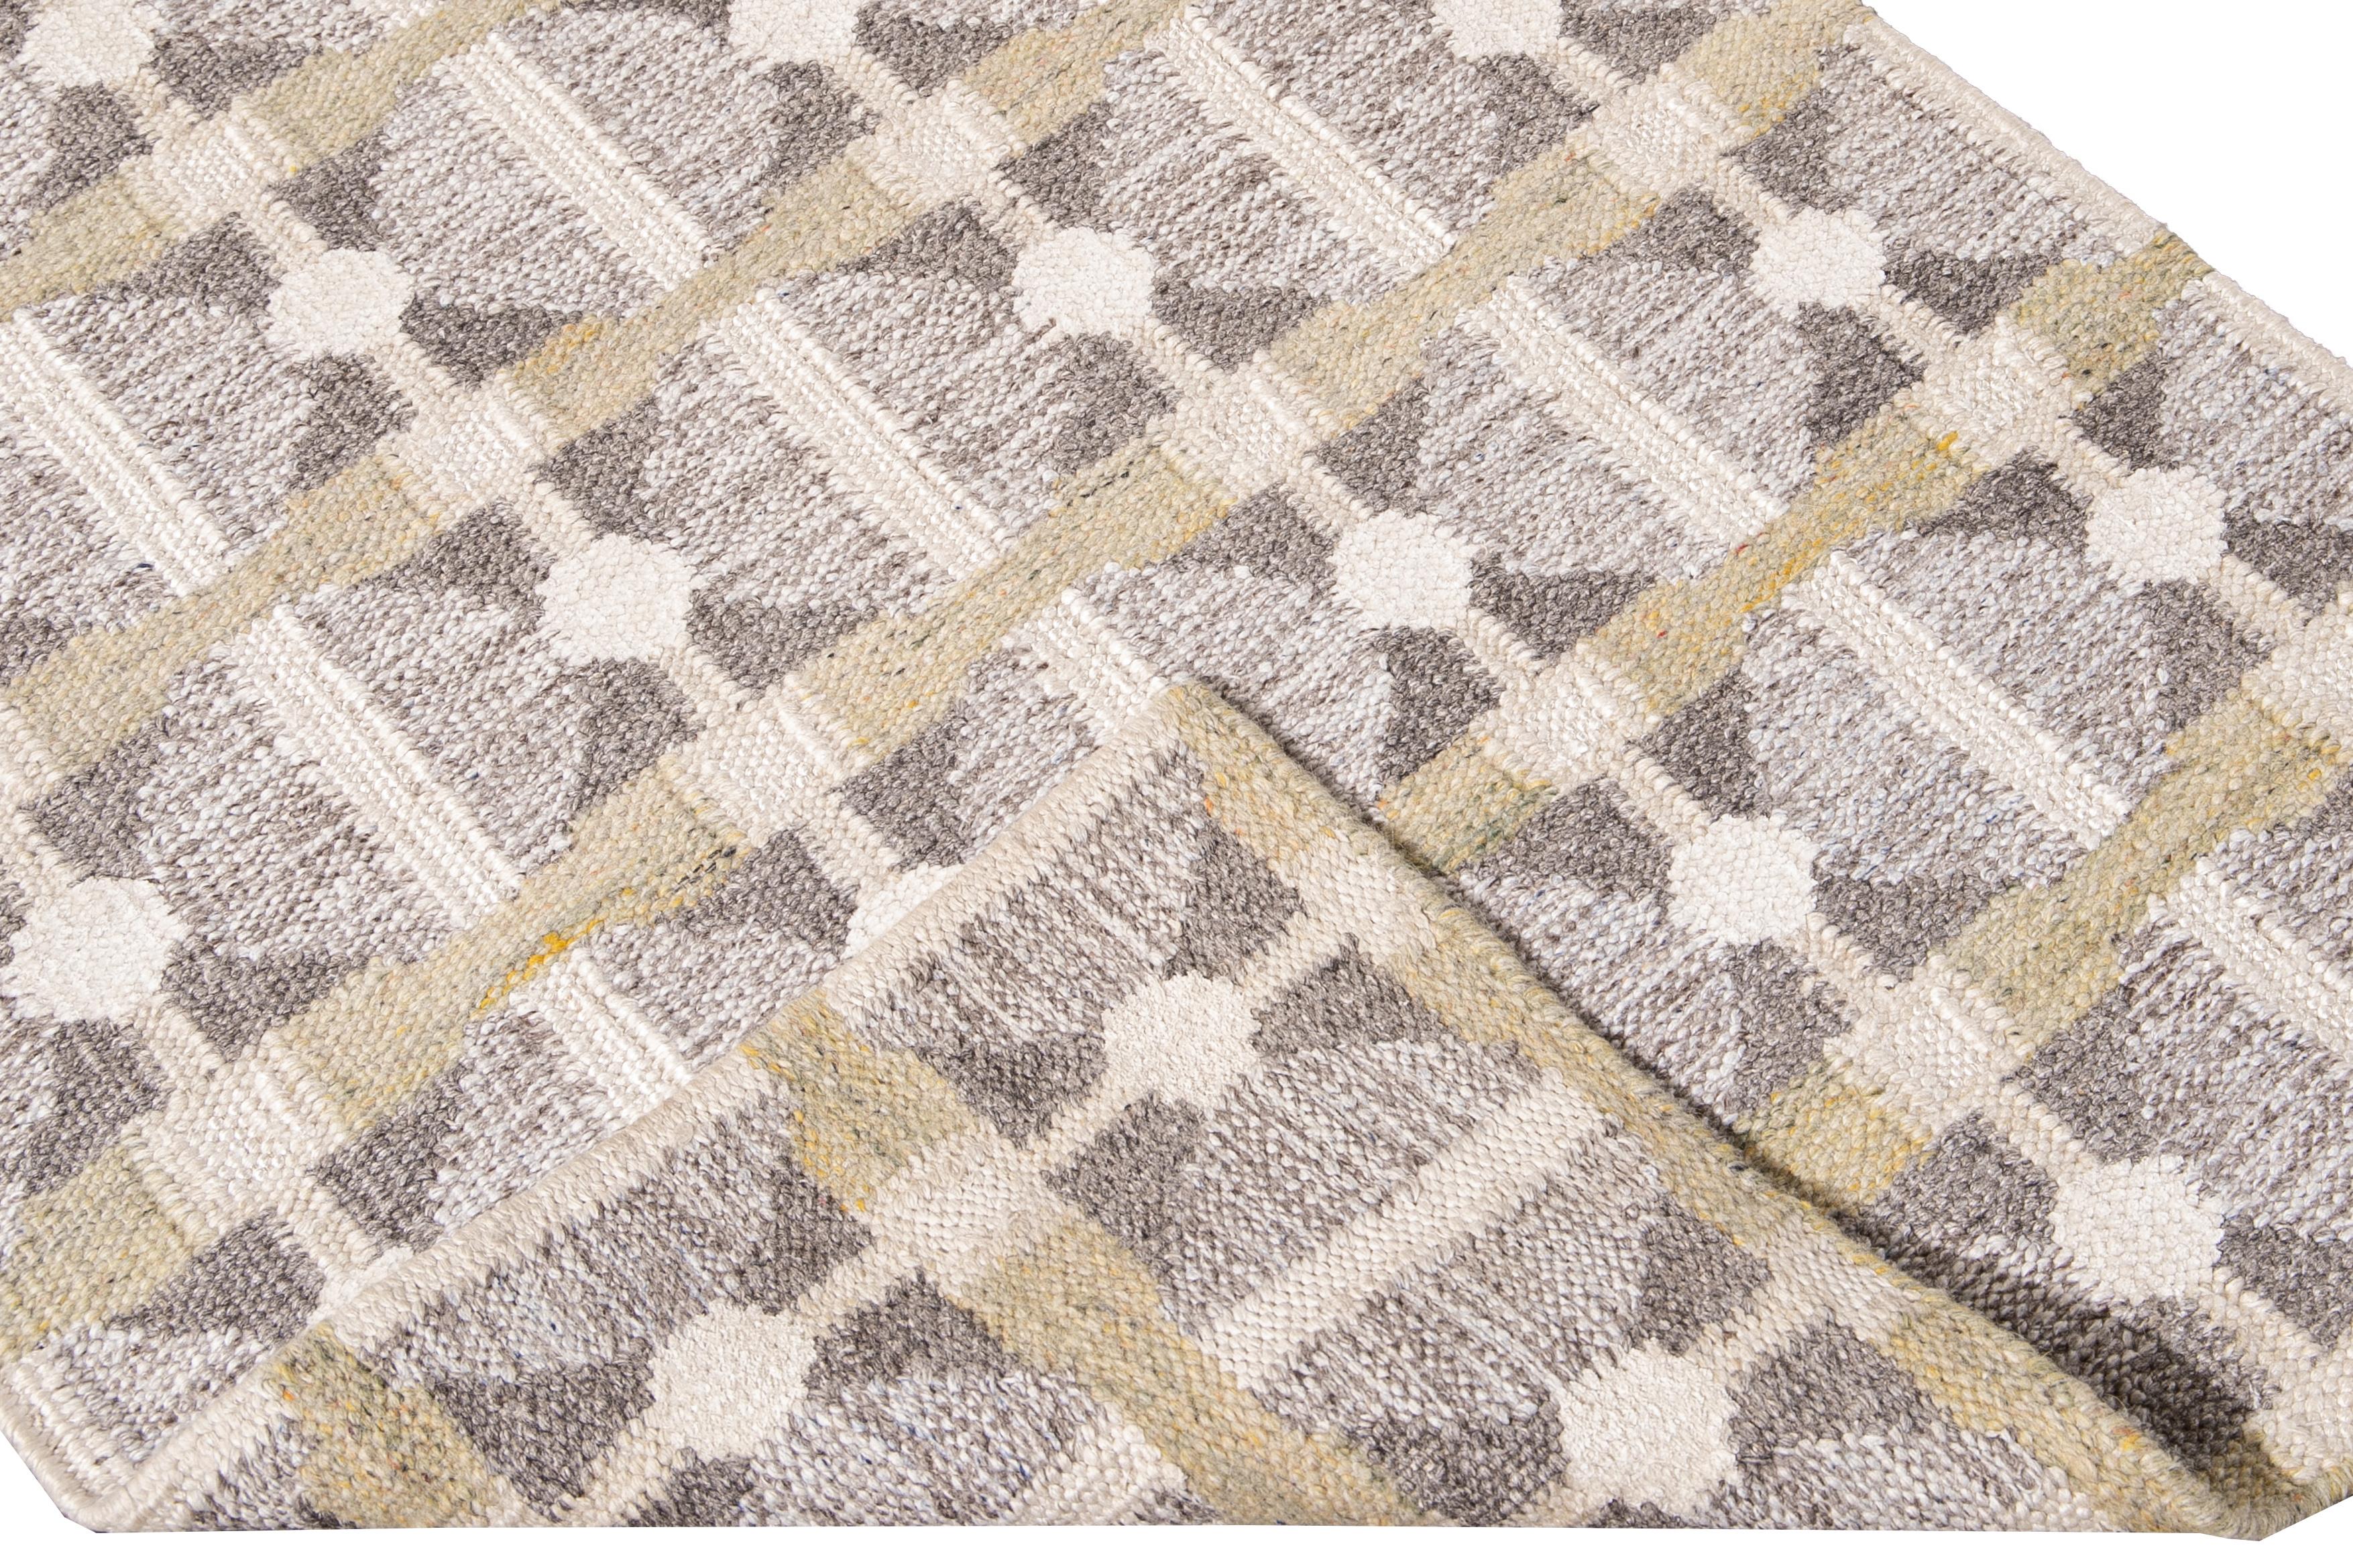 Beautiful modern long Swedish hand-knotted wool runner with a beige field. This Swedish runner has accents of gray and yellow in an all-over geometric abstract design.

This rug measures: 3'2